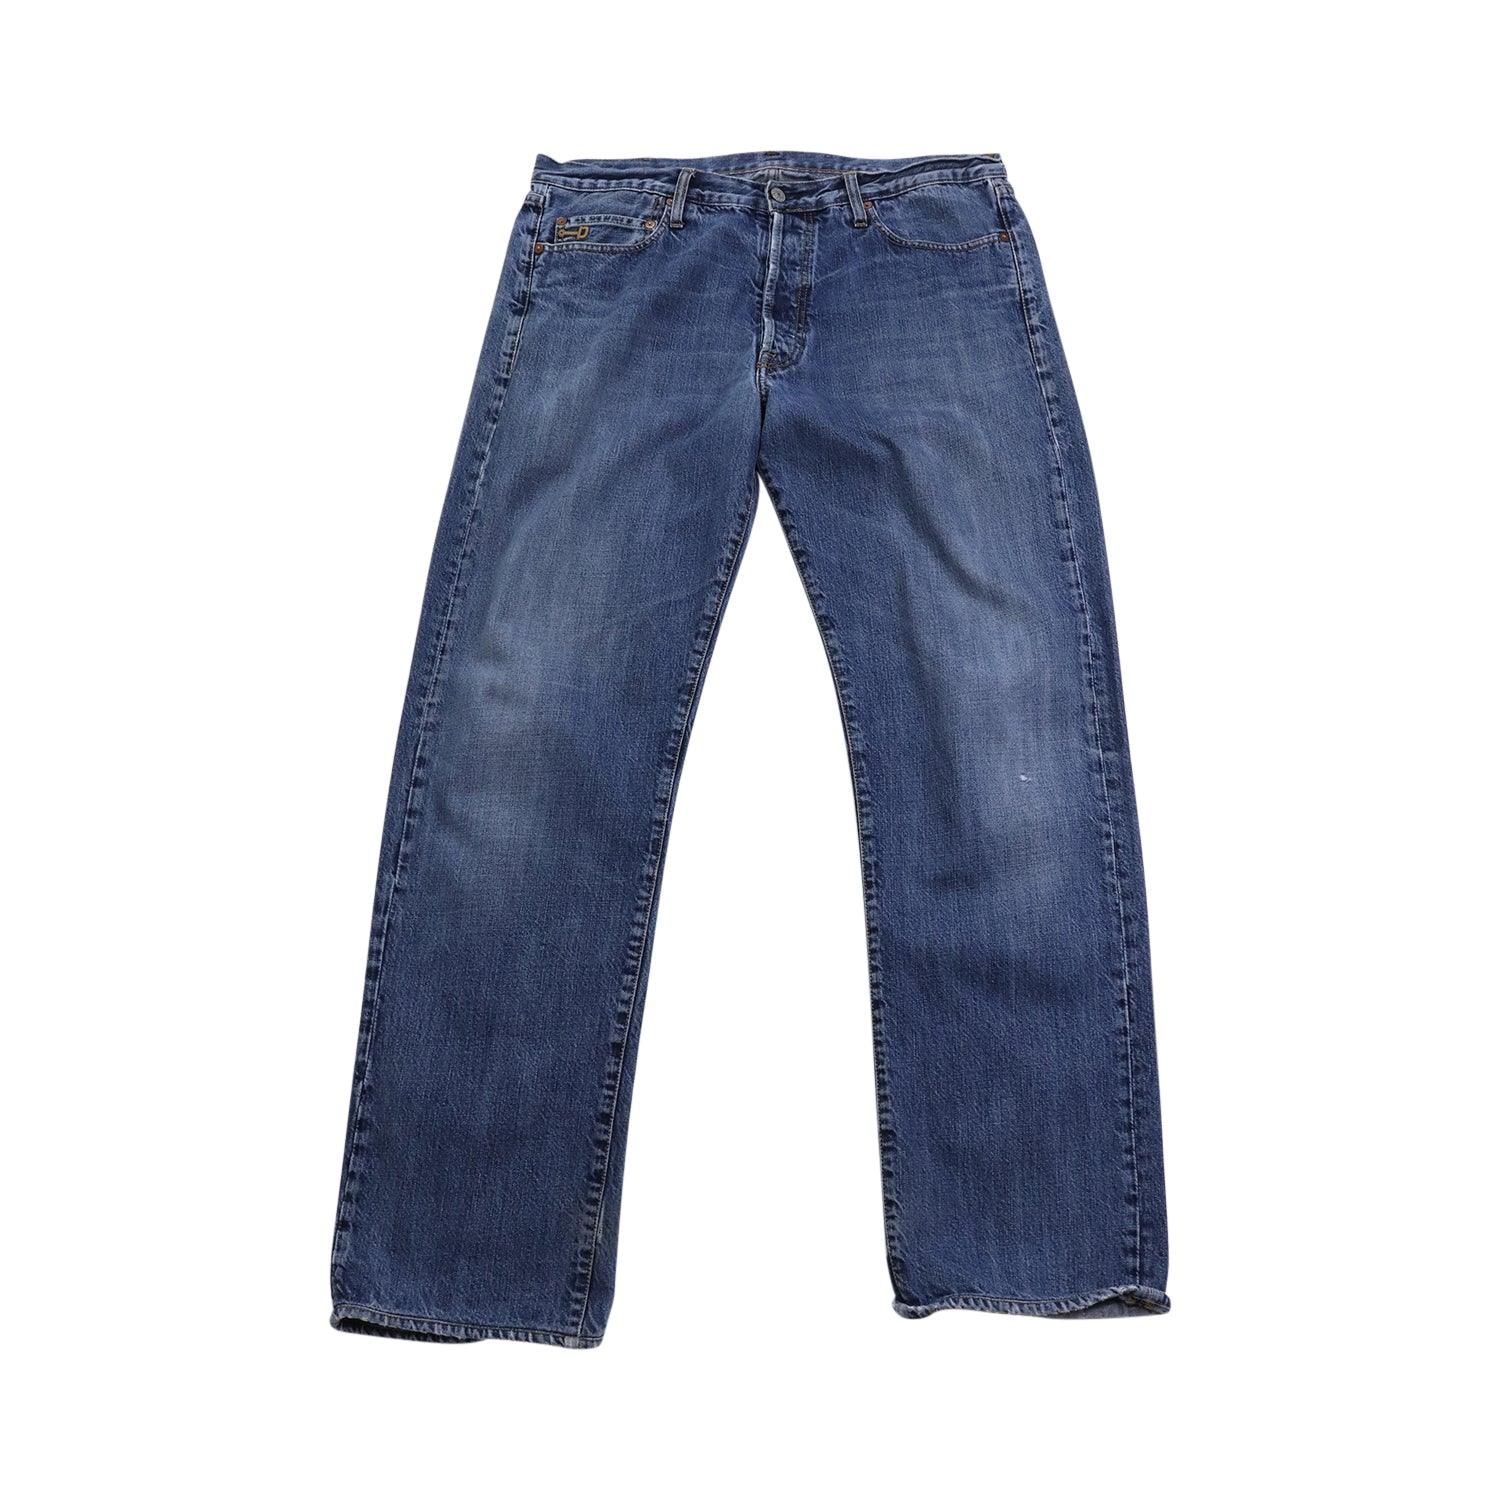 Gucci Jeans - Men's 52 - Fashionably Yours